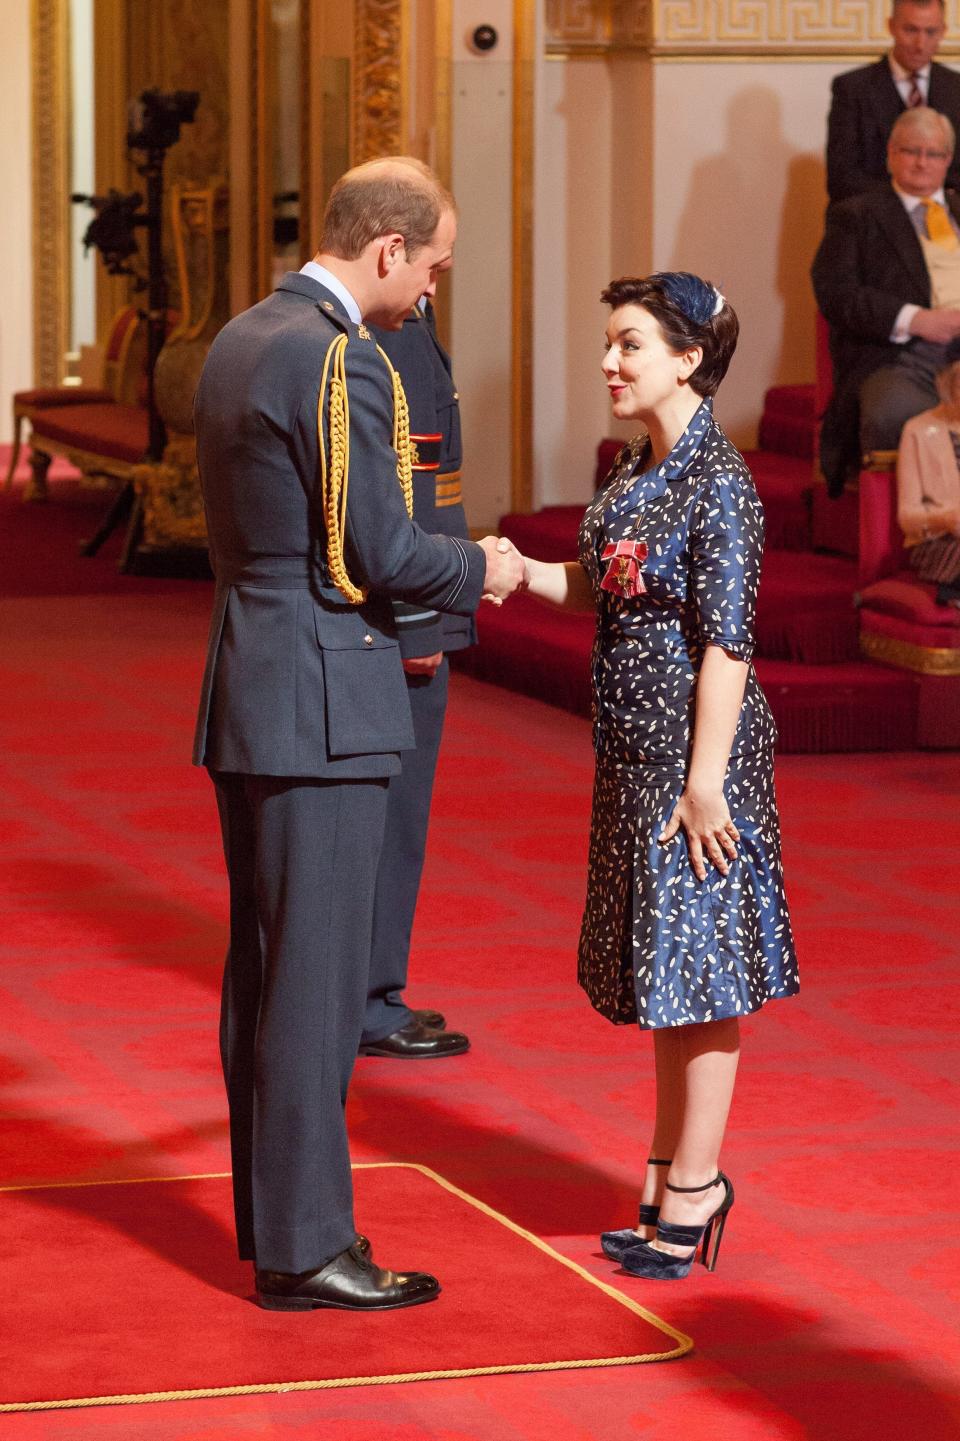 Sheridan Smith is made an OBE (Officer of the Order of the British Empire) by Prince William at an investiture ceremony at Buckingham Palace in London.